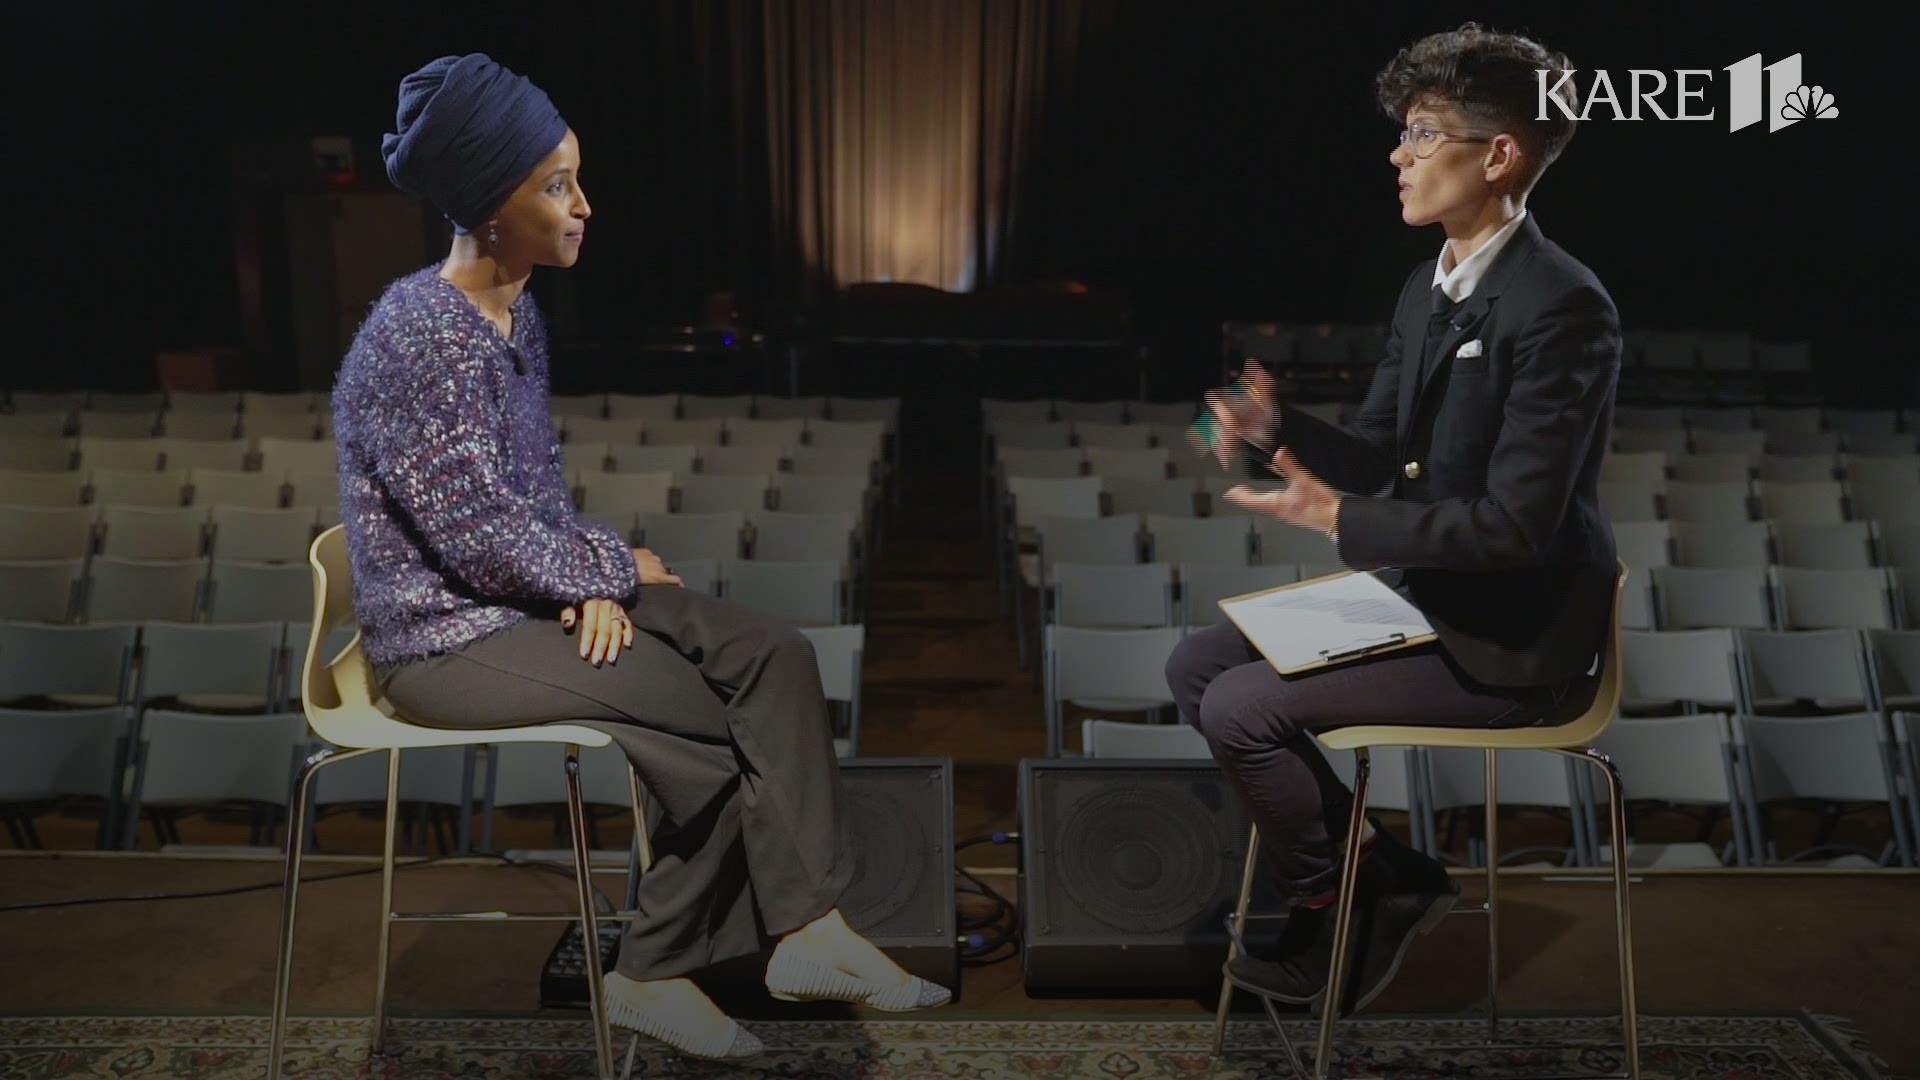 MN congresswoman Ilhan Omar sat down for a one-on-one interview with KARE 11's Jana Shortal on April 24, 2019. Rep. Omar discussed the death threats she has received.